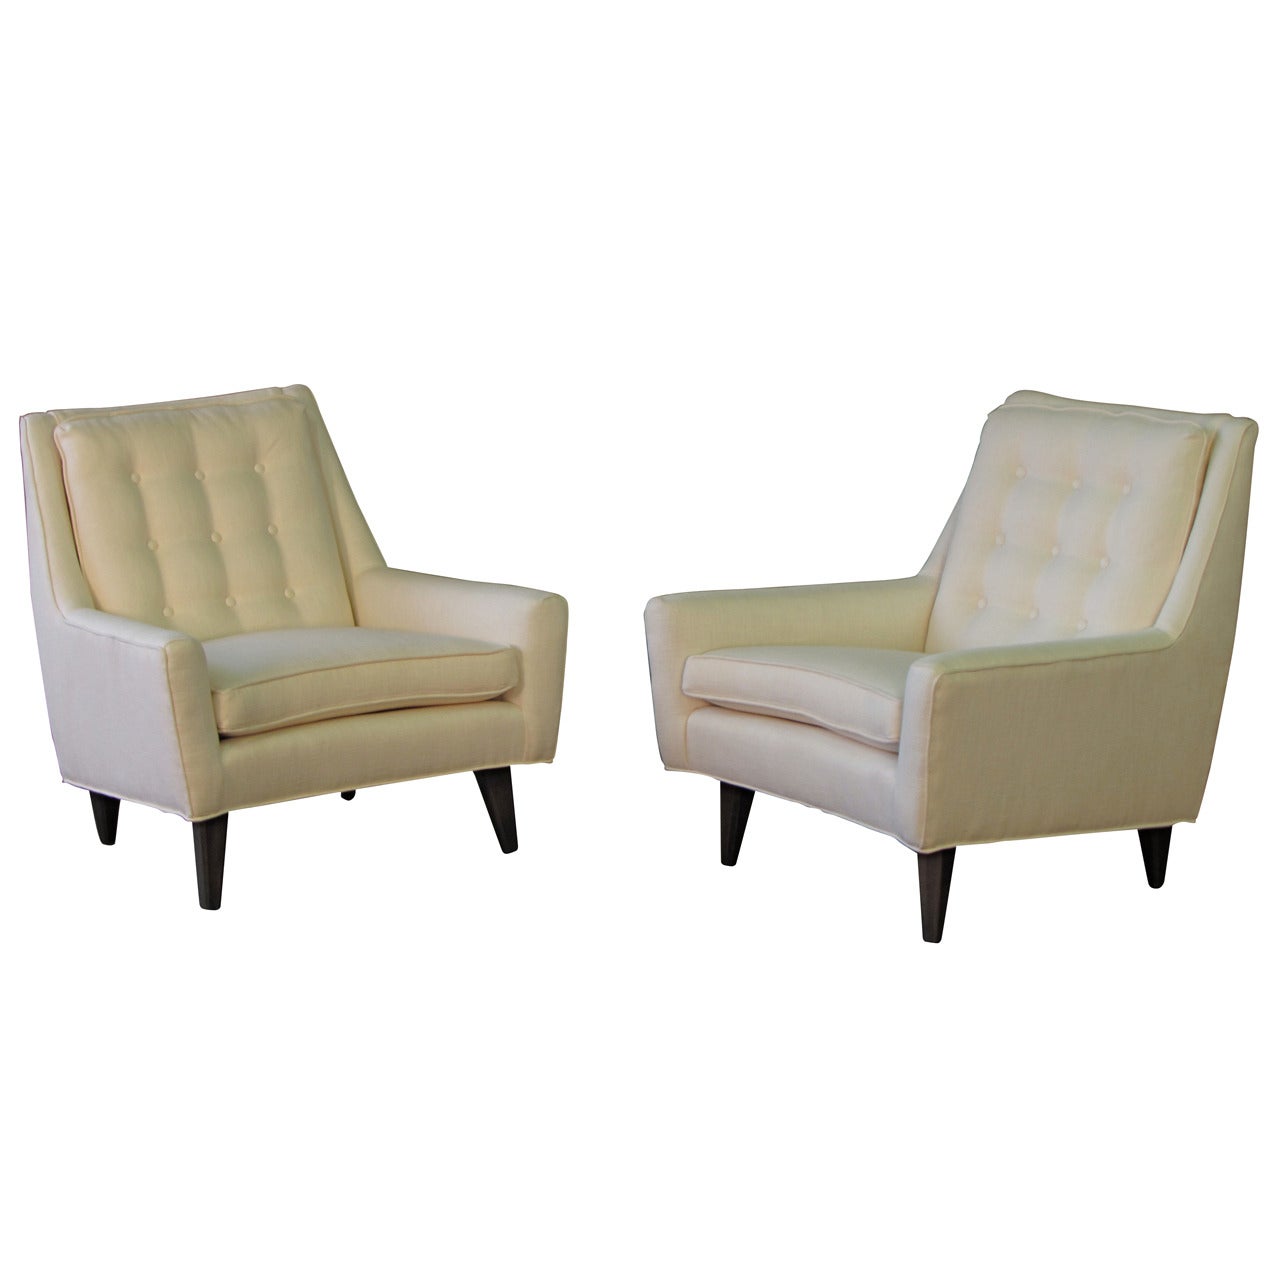 Classic Mid-Century Modern Lounge Chairs with Curved Detail, circa 1950